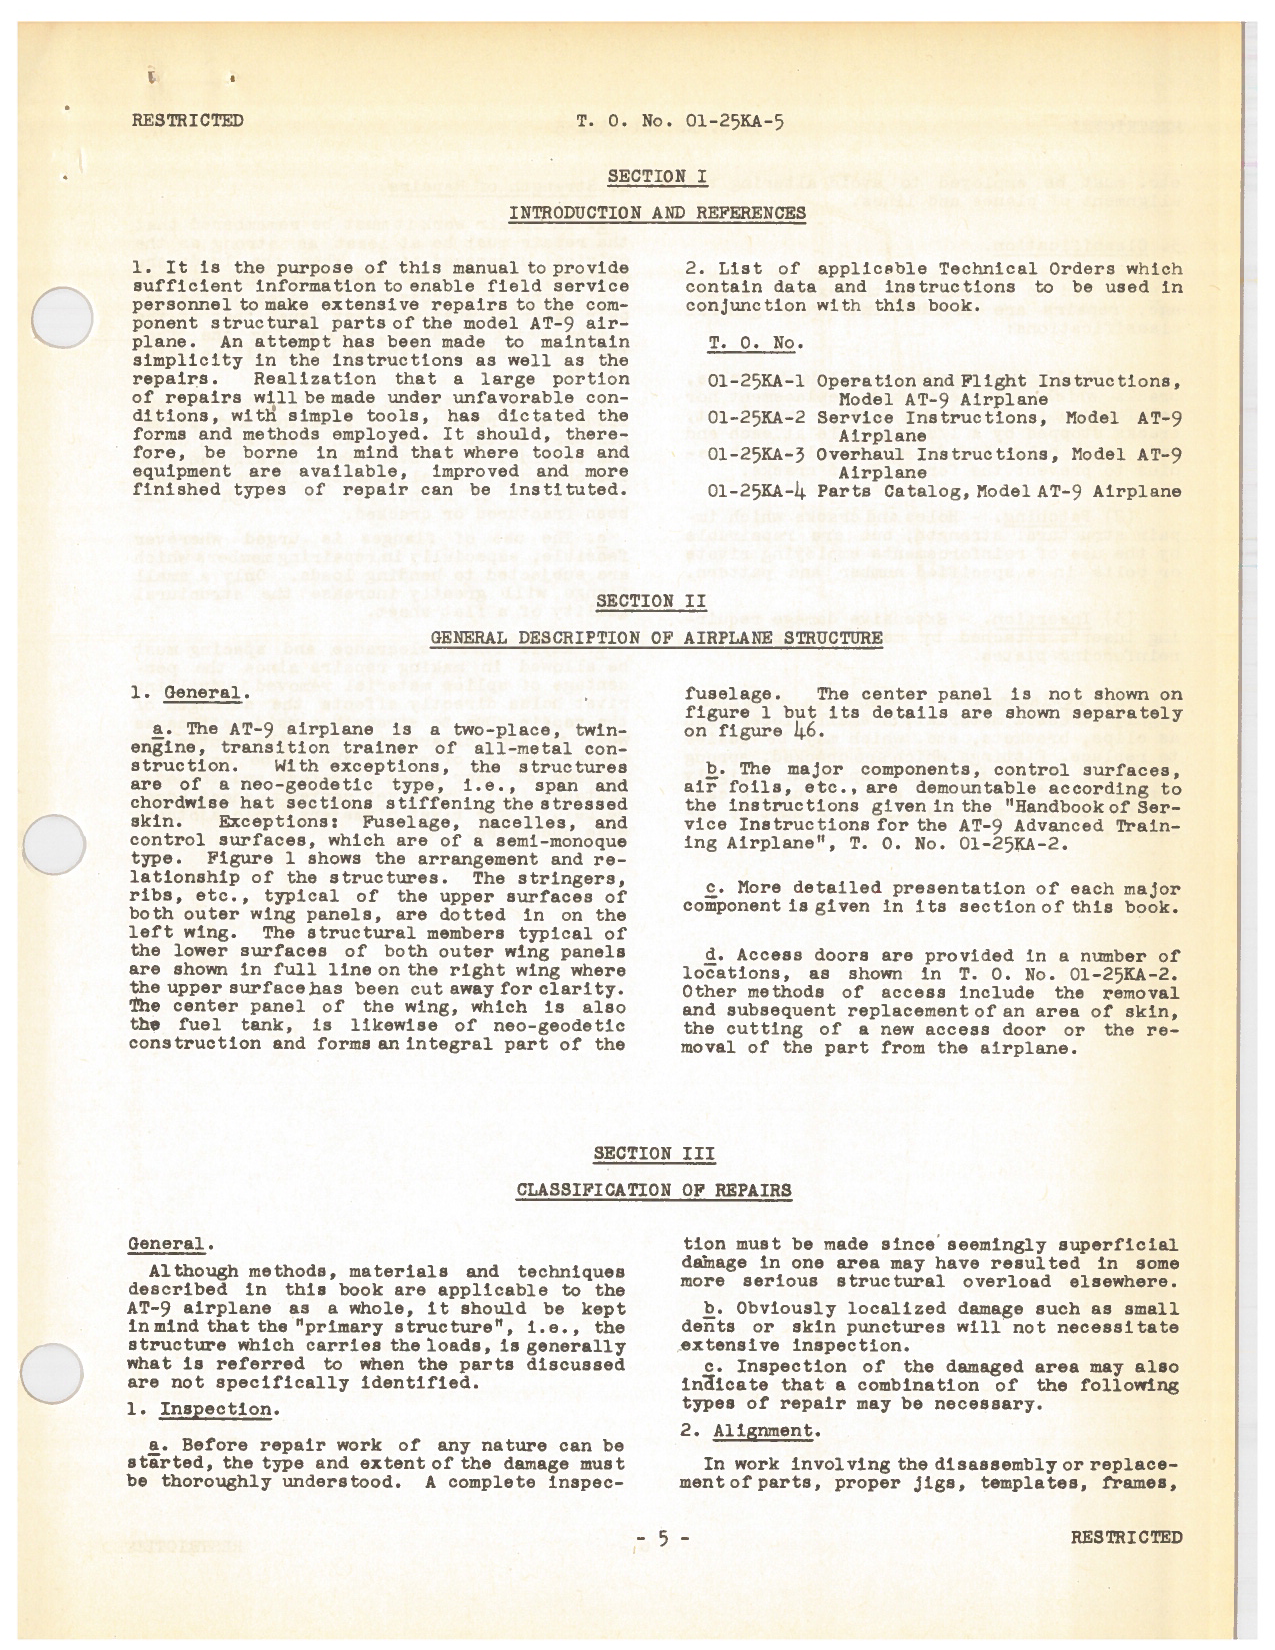 Sample page 7 from AirCorps Library document: Structural Repair Manual for the AT-9 Advanced Training Airplane